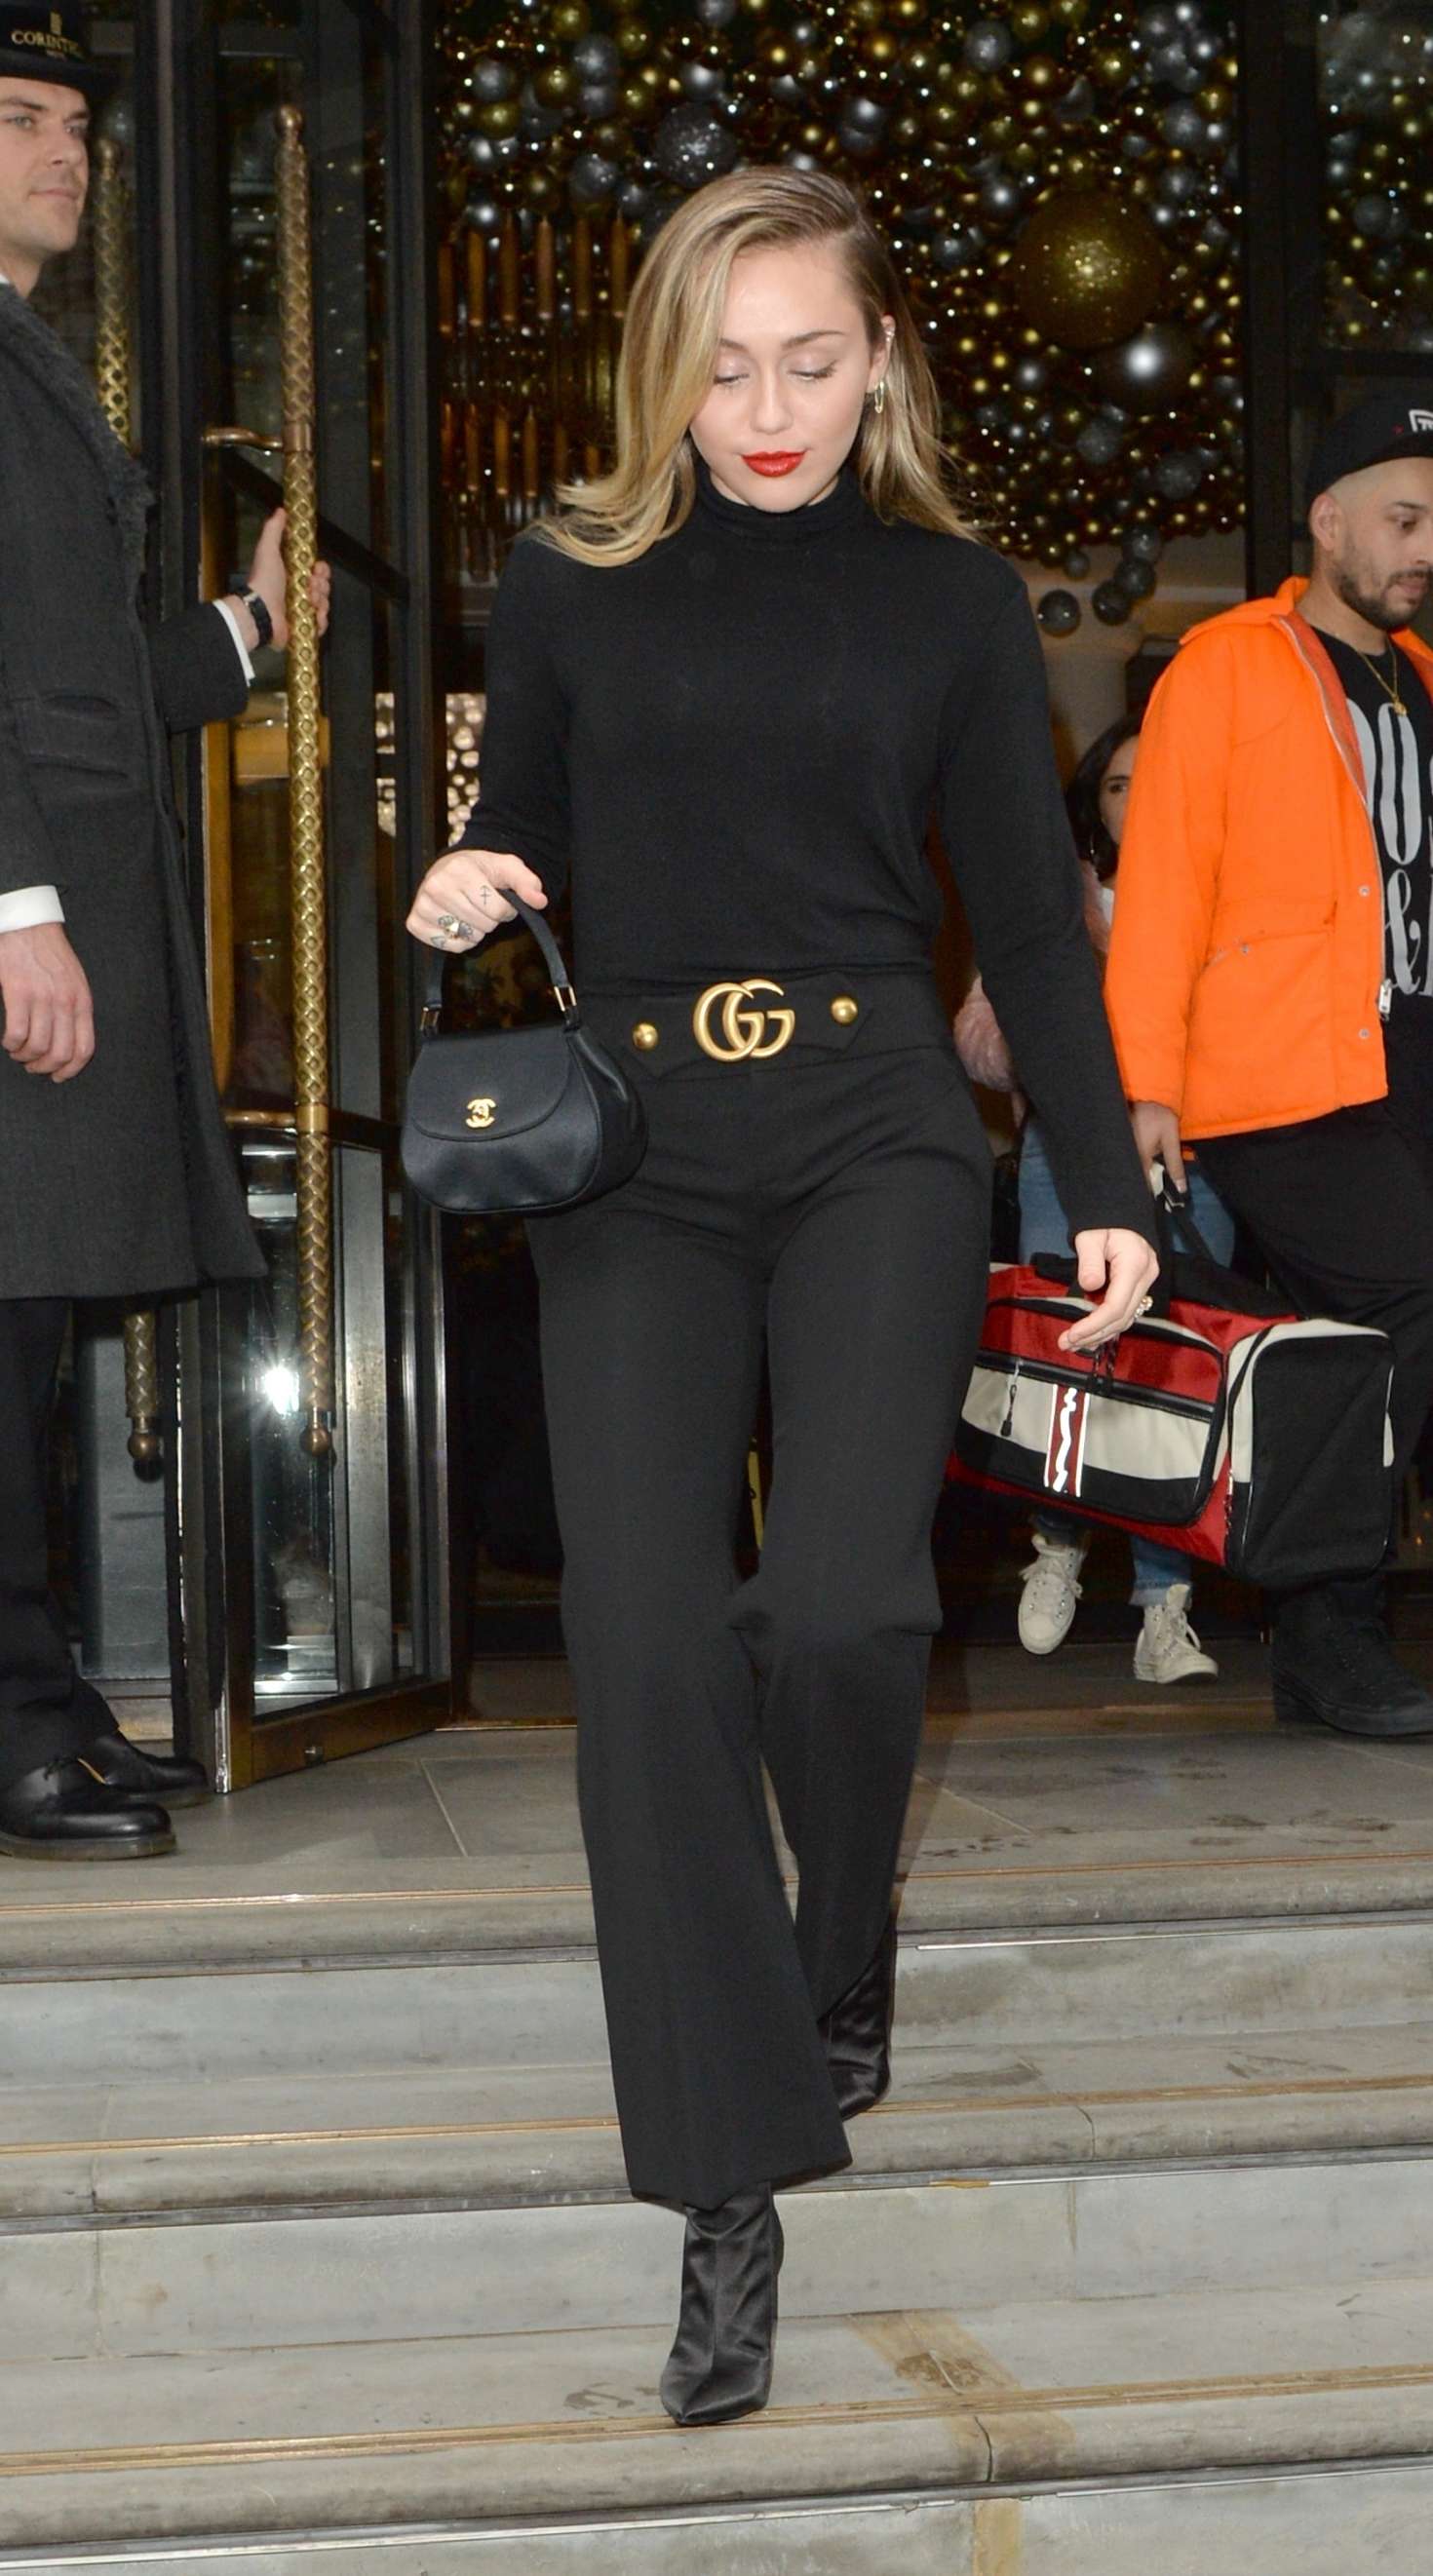 Miley Cyrus in Black Outfit â€“ Out in London